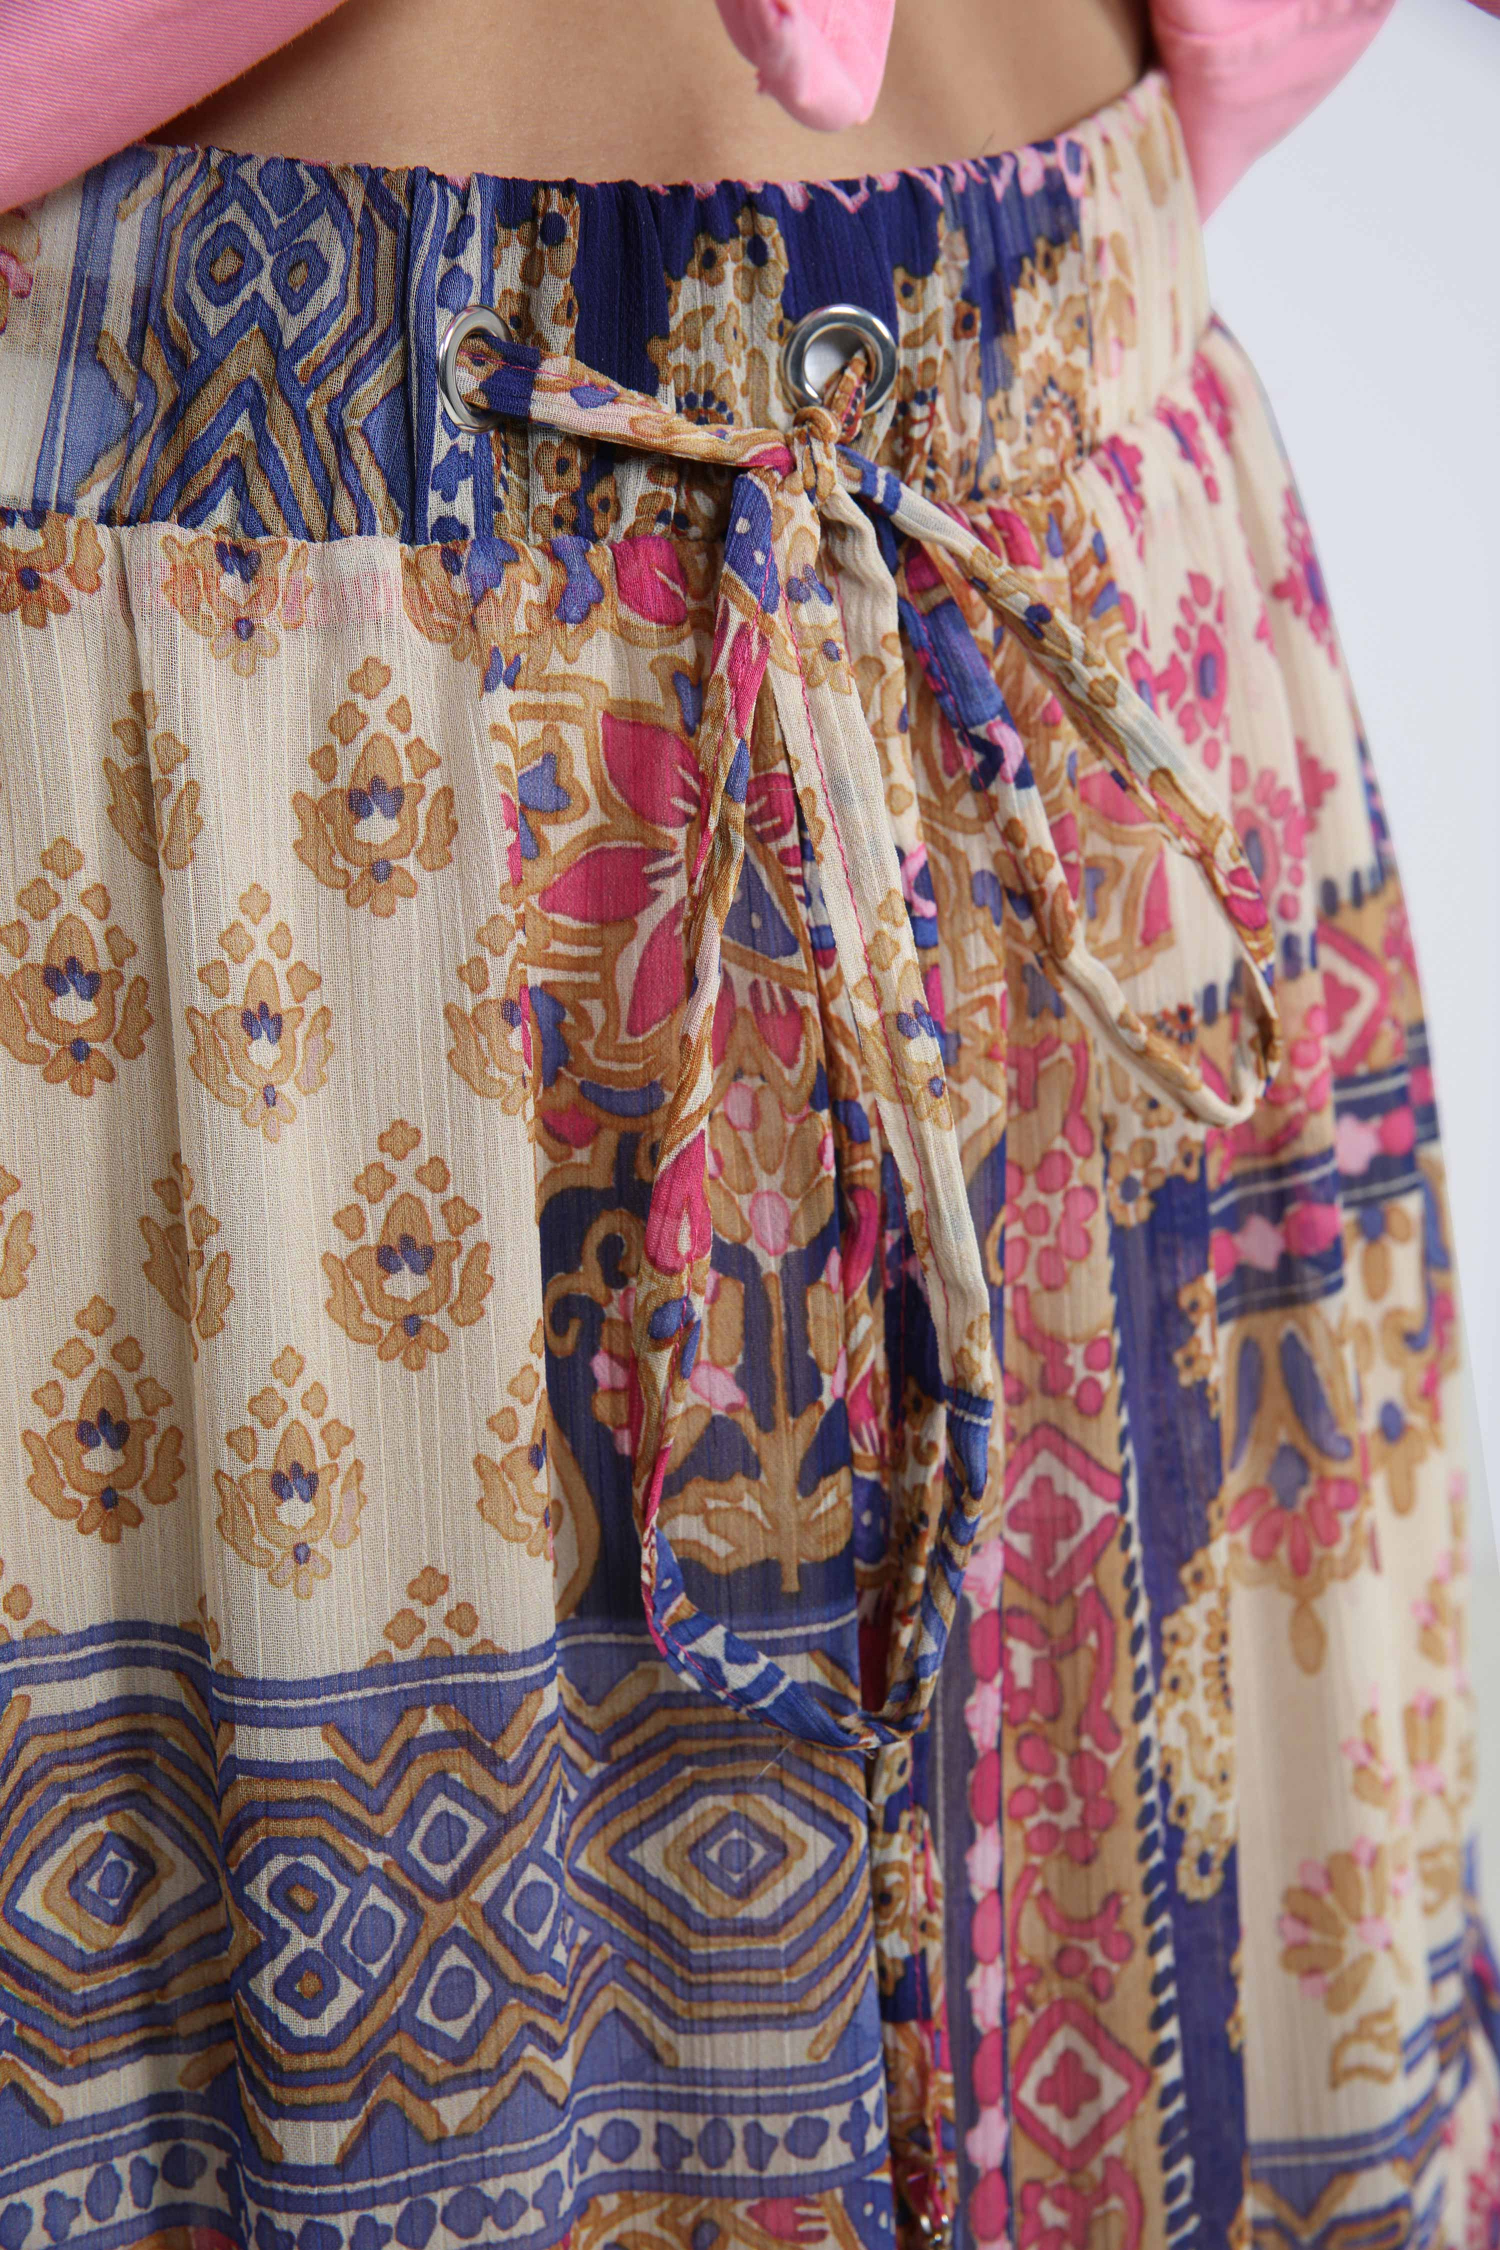 Bohemian style skirt in printed voile